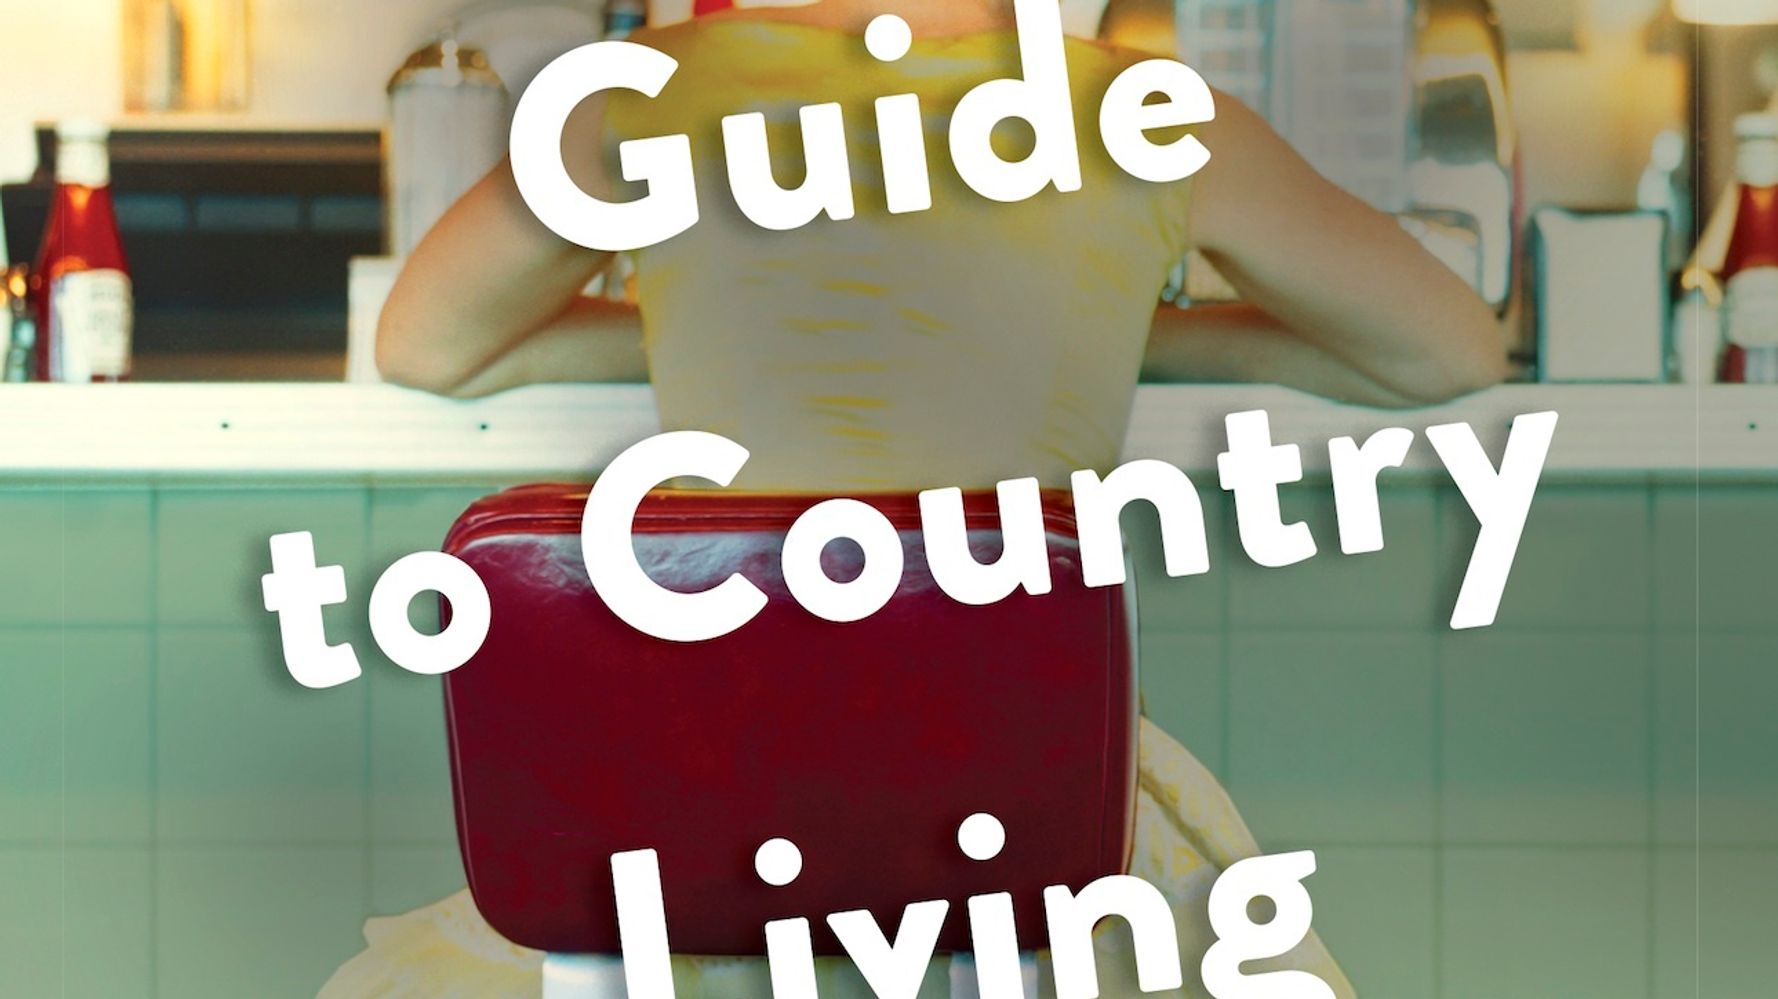 If I liked The City Baker's Guide to Country Living by Louise